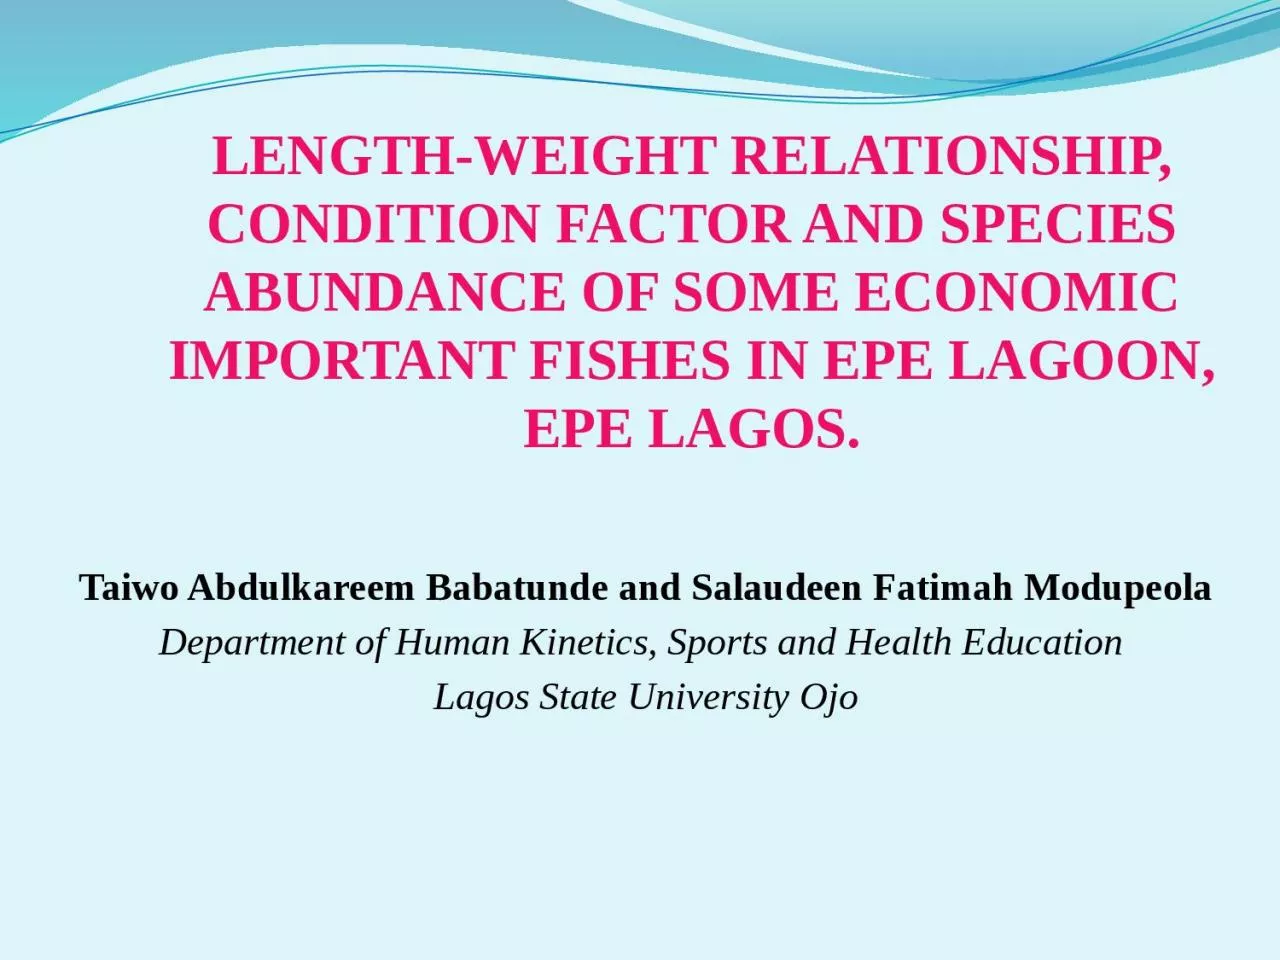 LENGTH-WEIGHT RELATIONSHIP, CONDITION FACTOR AND SPECIES ABUNDANCE OF SOME ECONOMIC IMPORTANT